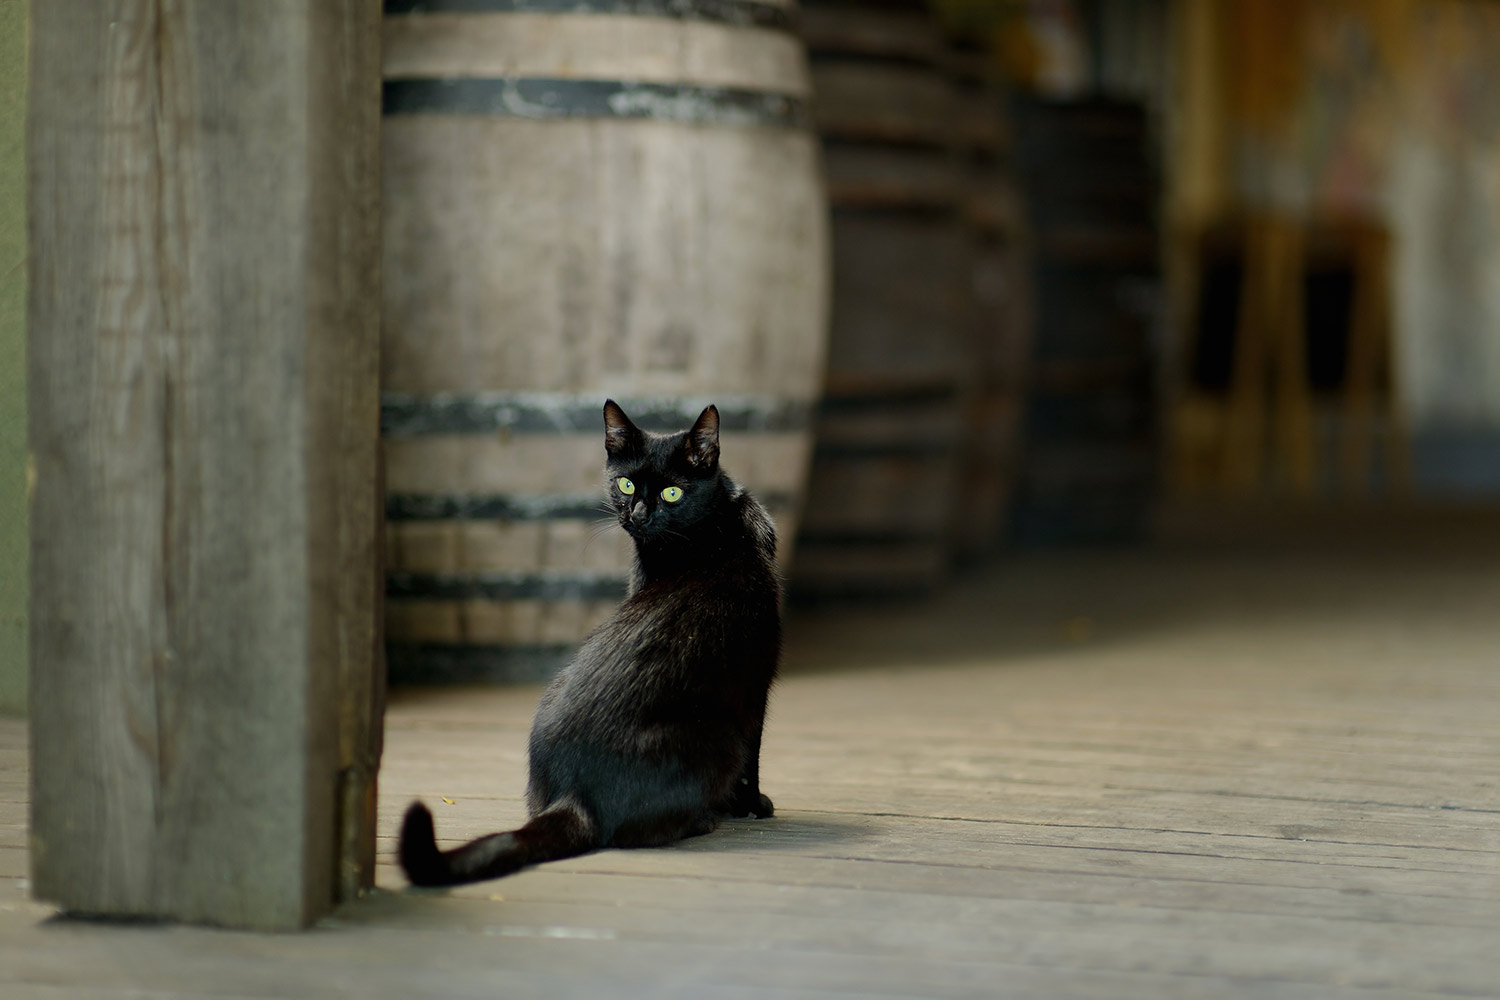 bigstock-Black-Cat-In-An-Old-Winery-154119956